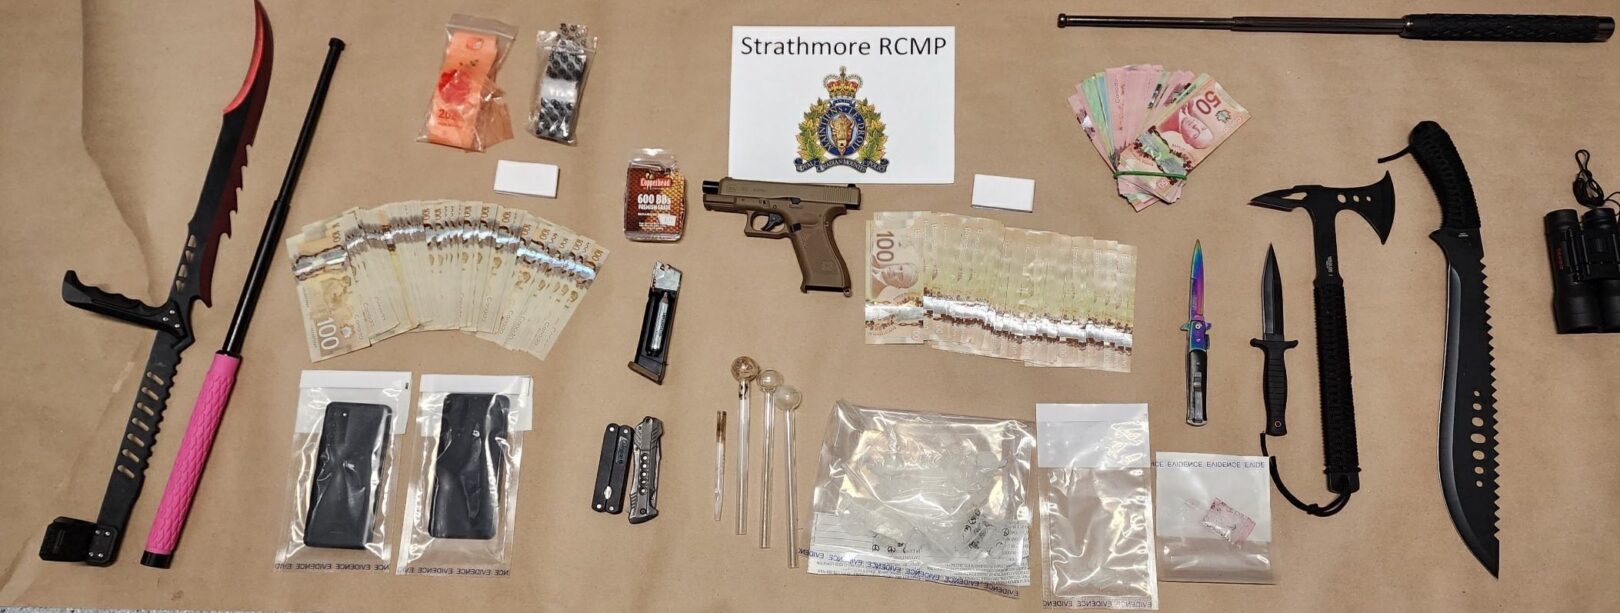 Strathmore RCMP arrest two men with Canada-wide warrants pic 2